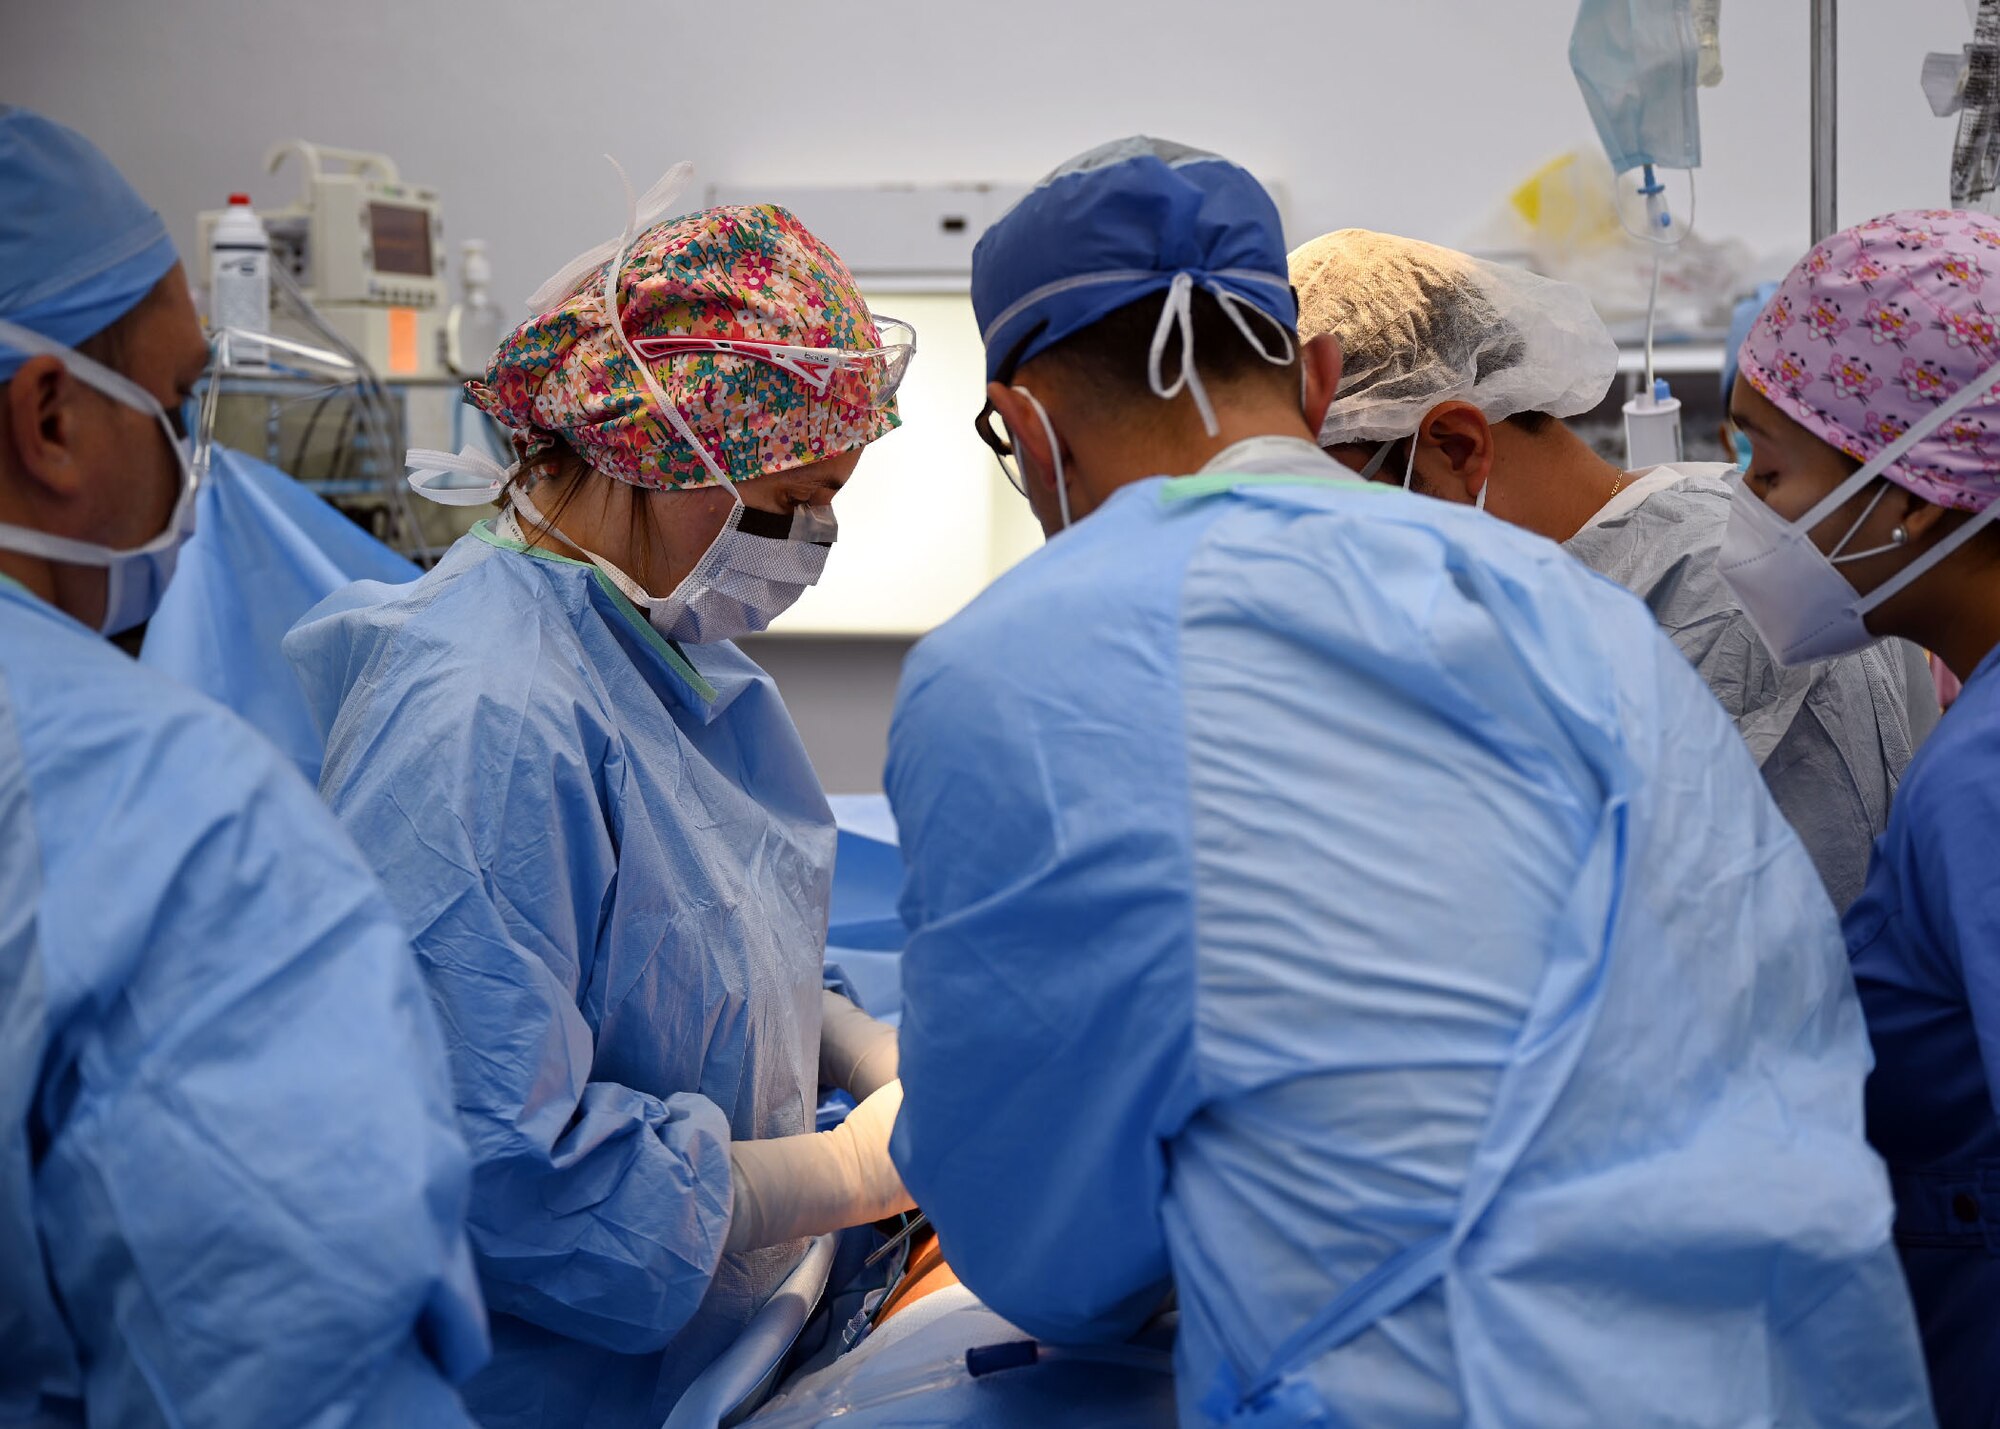 U.S. military doctors arrived in Choluteca for a urologic surgical readiness exercise to provide essential surgeries to pre-selected Honduran patients.